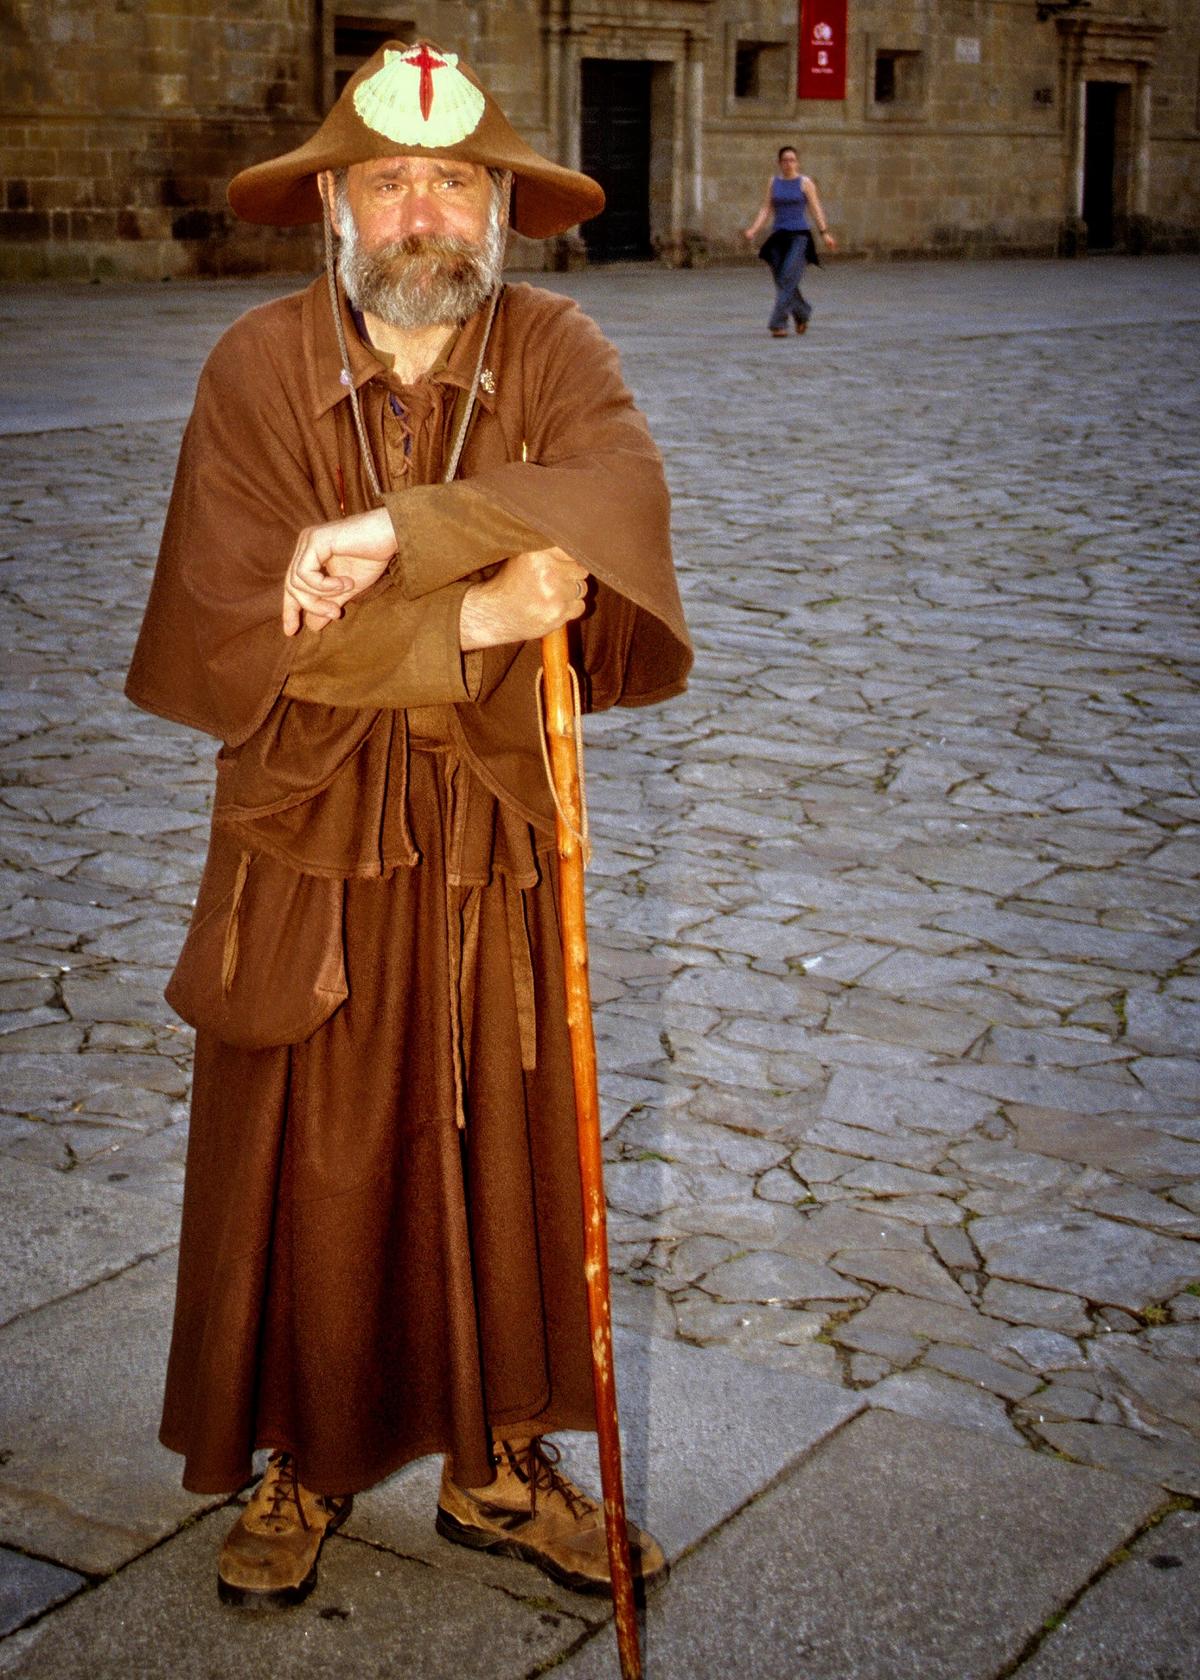 A man dressed as one of the pilgrims who used to trek across Europe along the “Way of St. James” destined for Santiago de Compostela. (Copyright Fred J. Eckert)